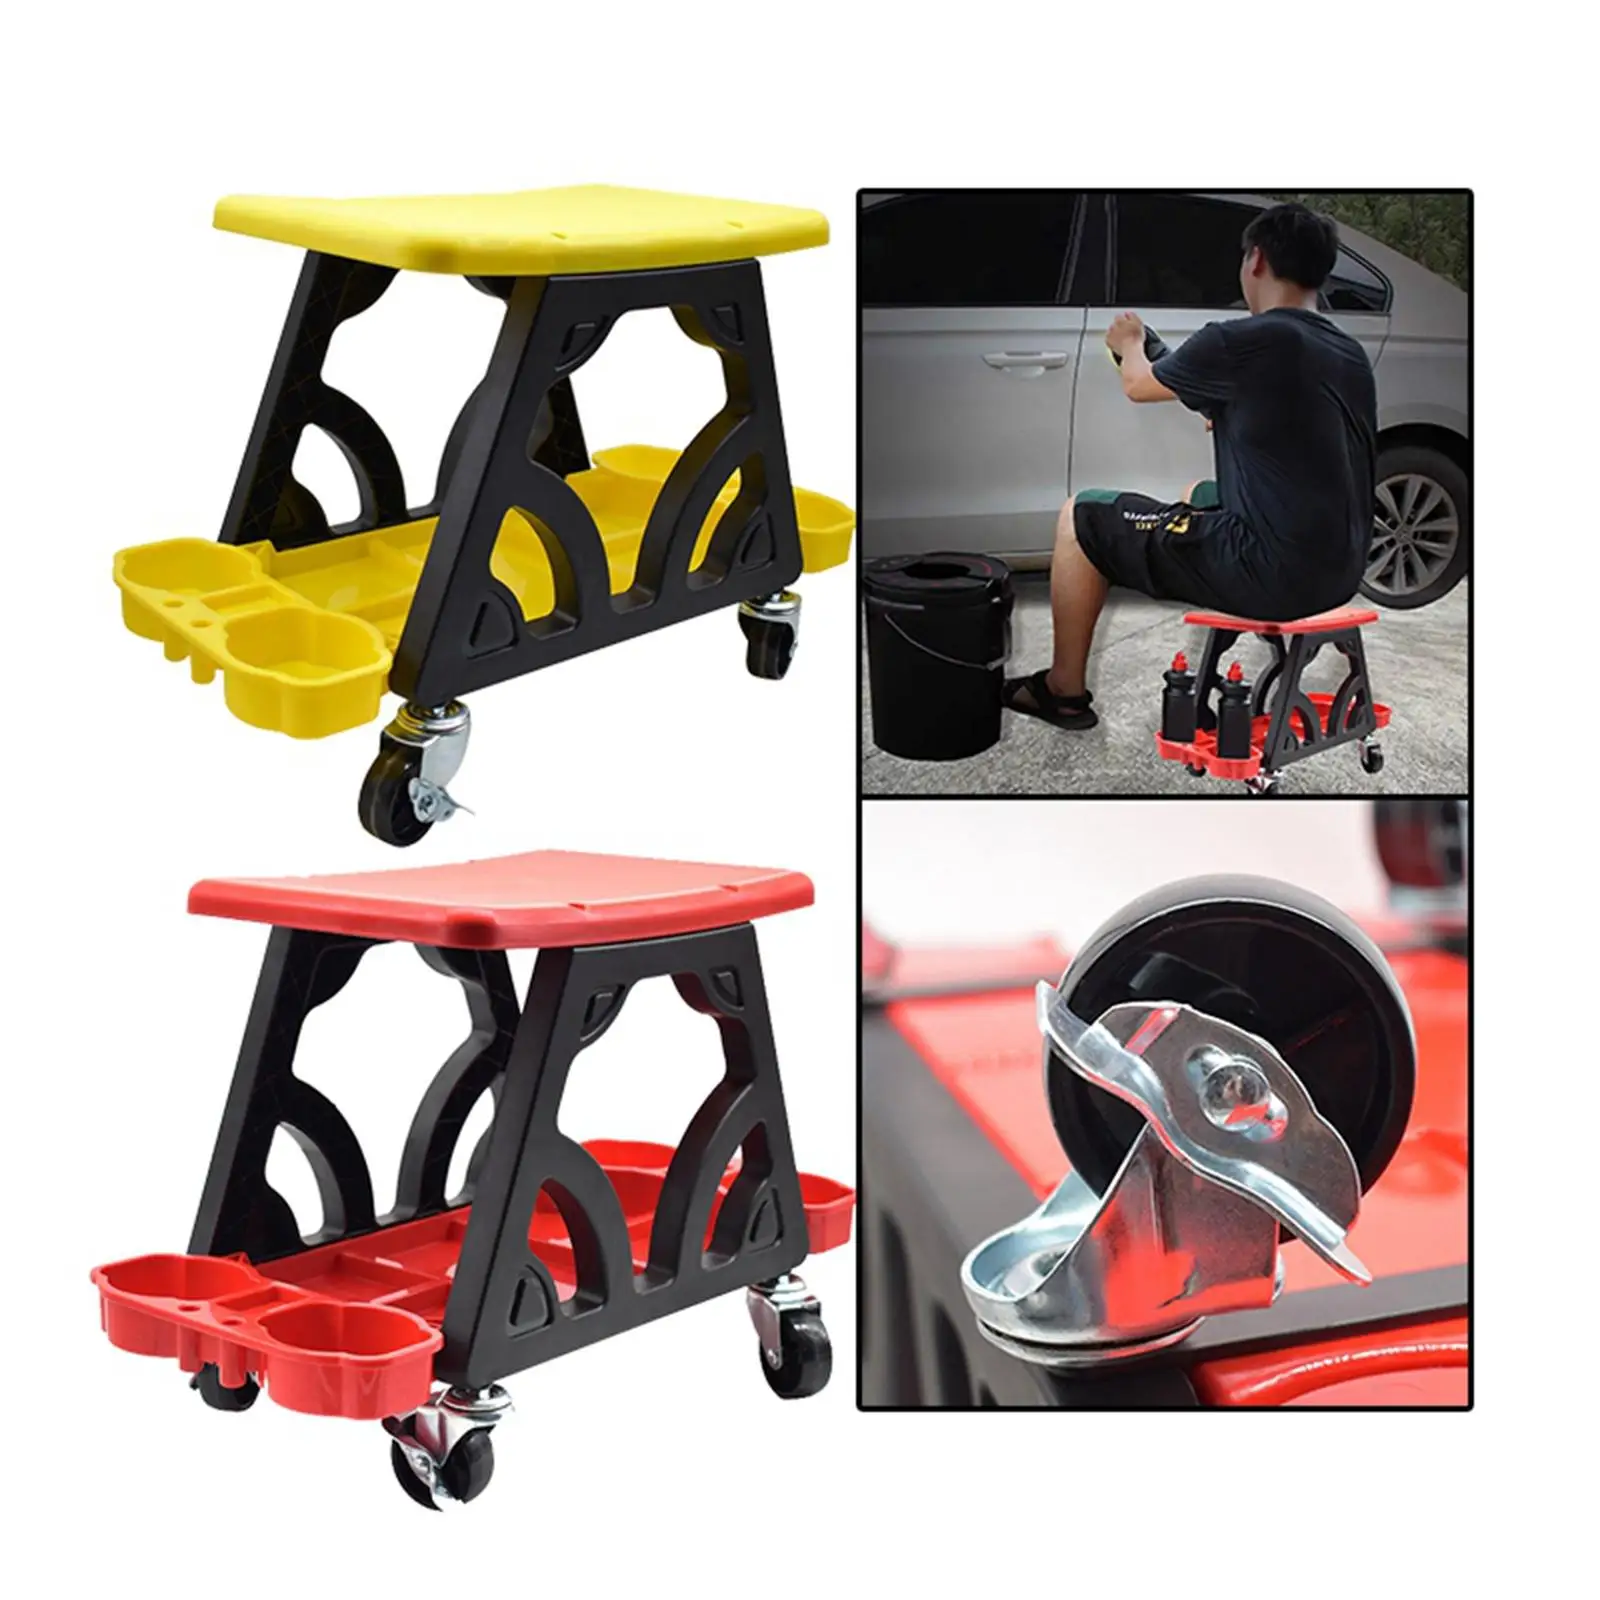 Car Detailing Stool Chair Wheels Roller Creeper Seat with Storage Holder for Wax Polishing Projects